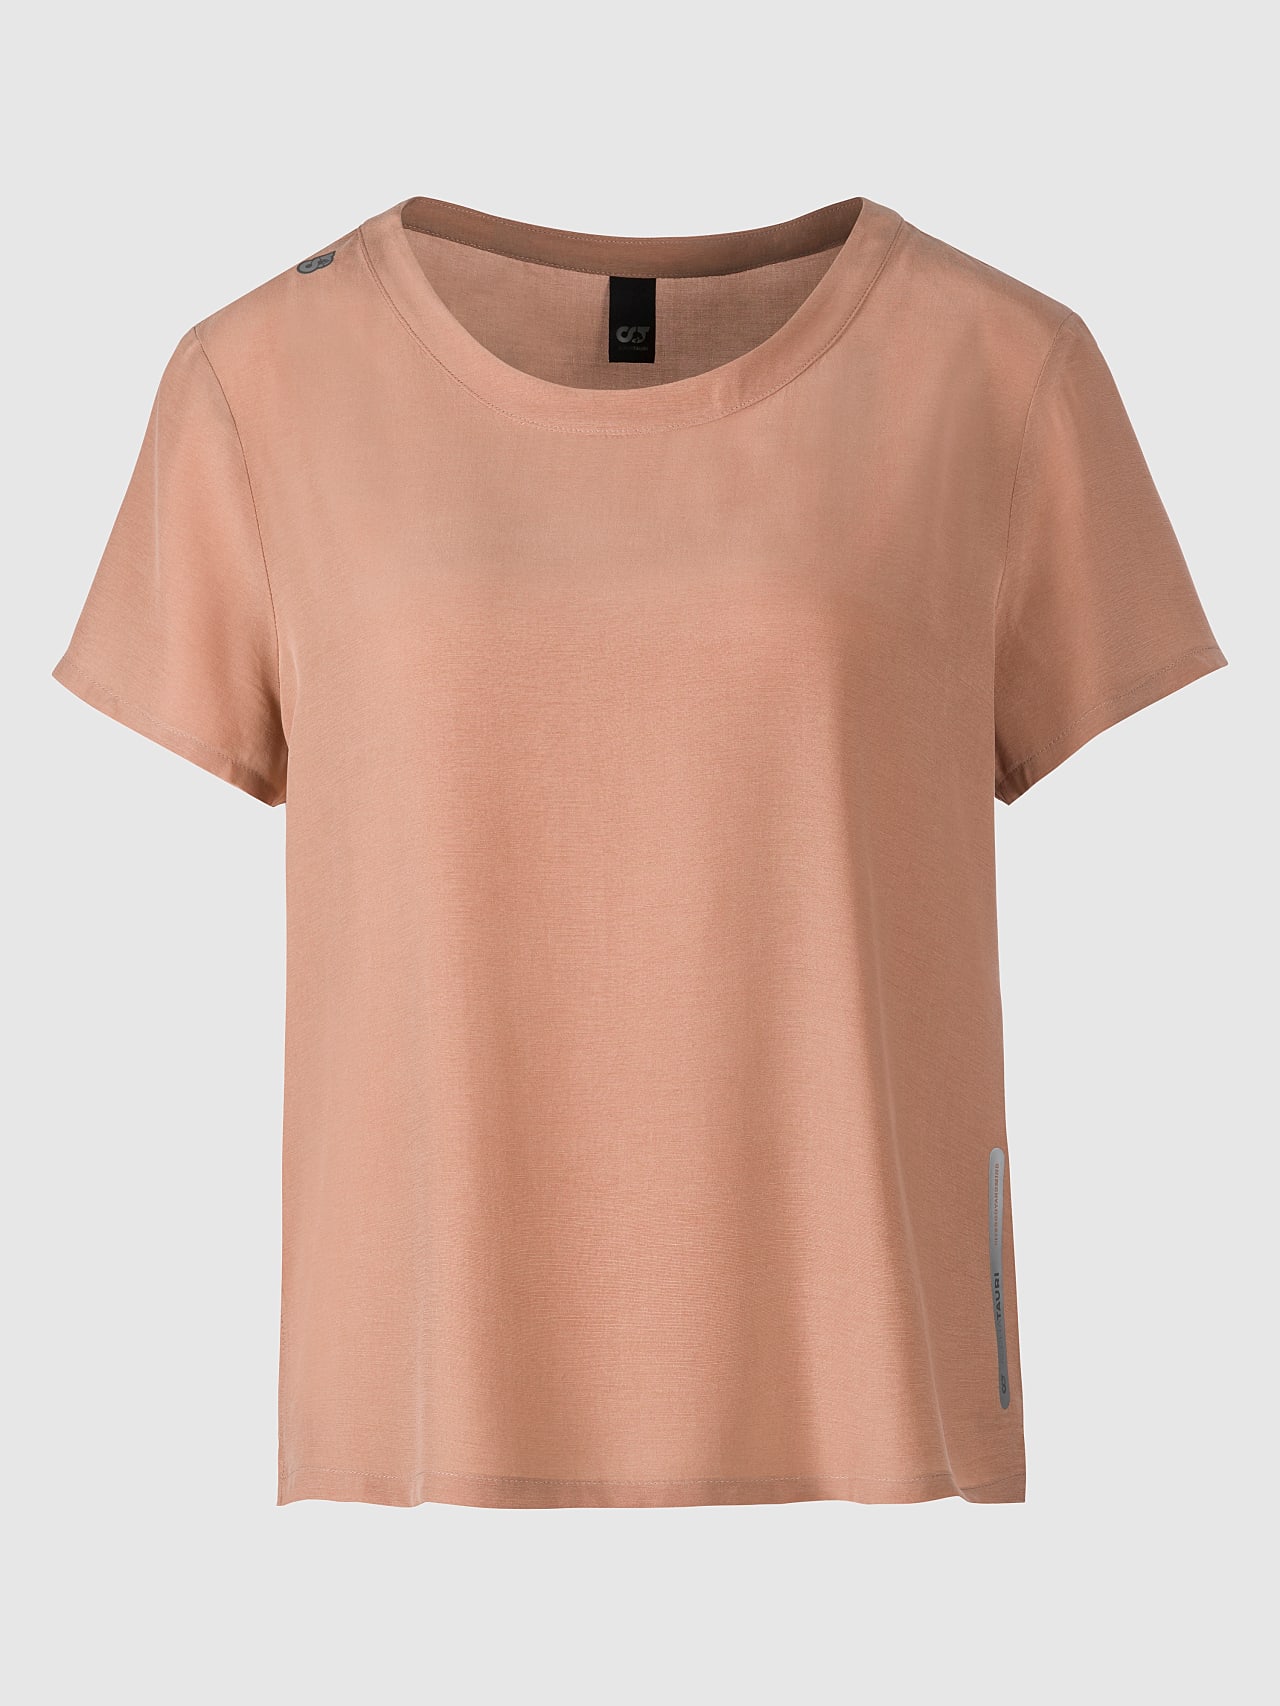 AlphaTauri | WOLAM V2.Y5.01 | Silk Touch Cupro T-Shirt in rose for Women